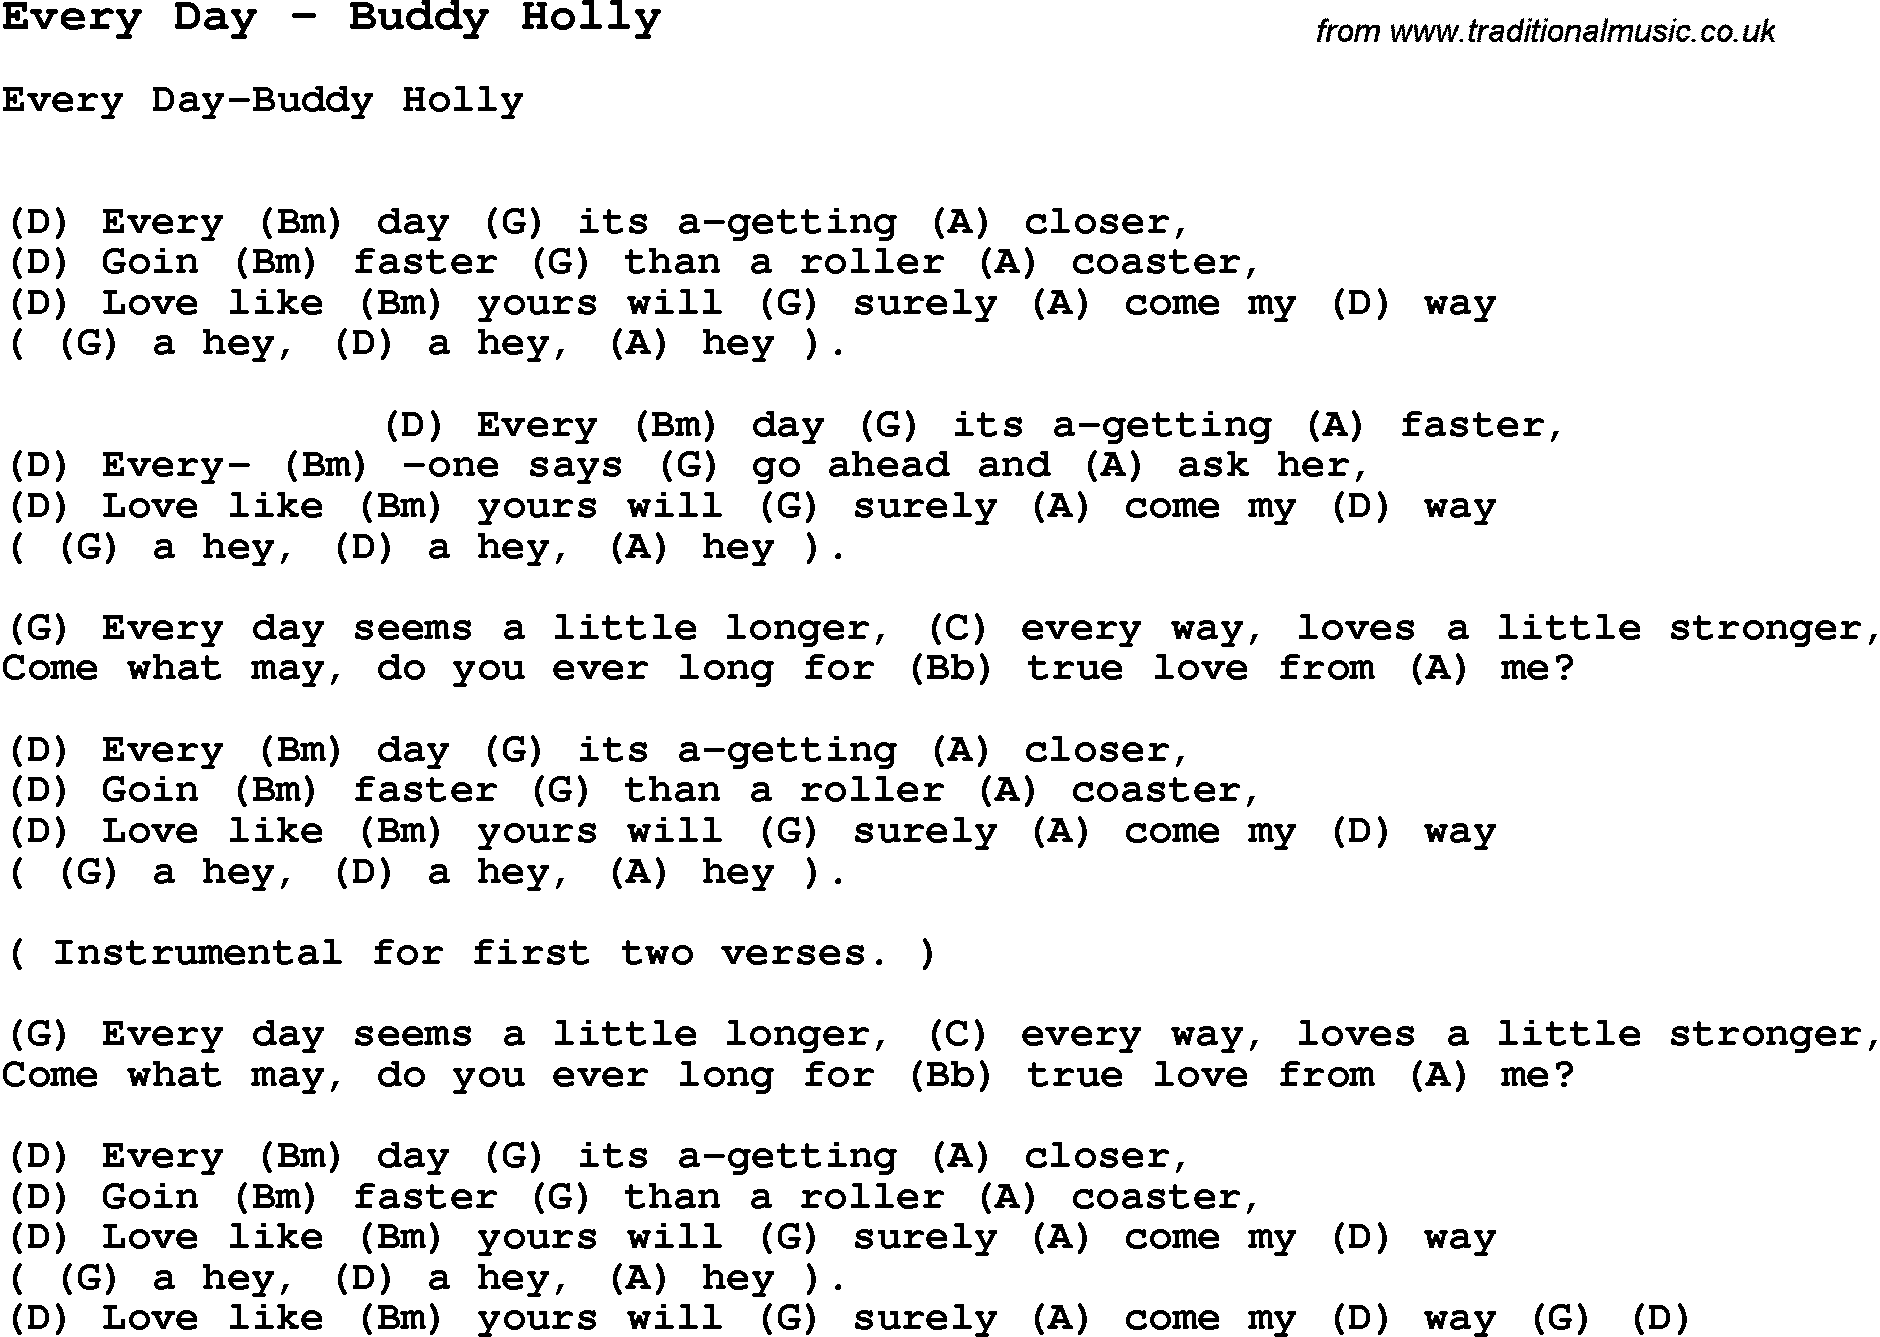 Song Every Day by Buddy Holly, with lyrics for vocal performance and accompaniment chords for Ukulele, Guitar Banjo etc.